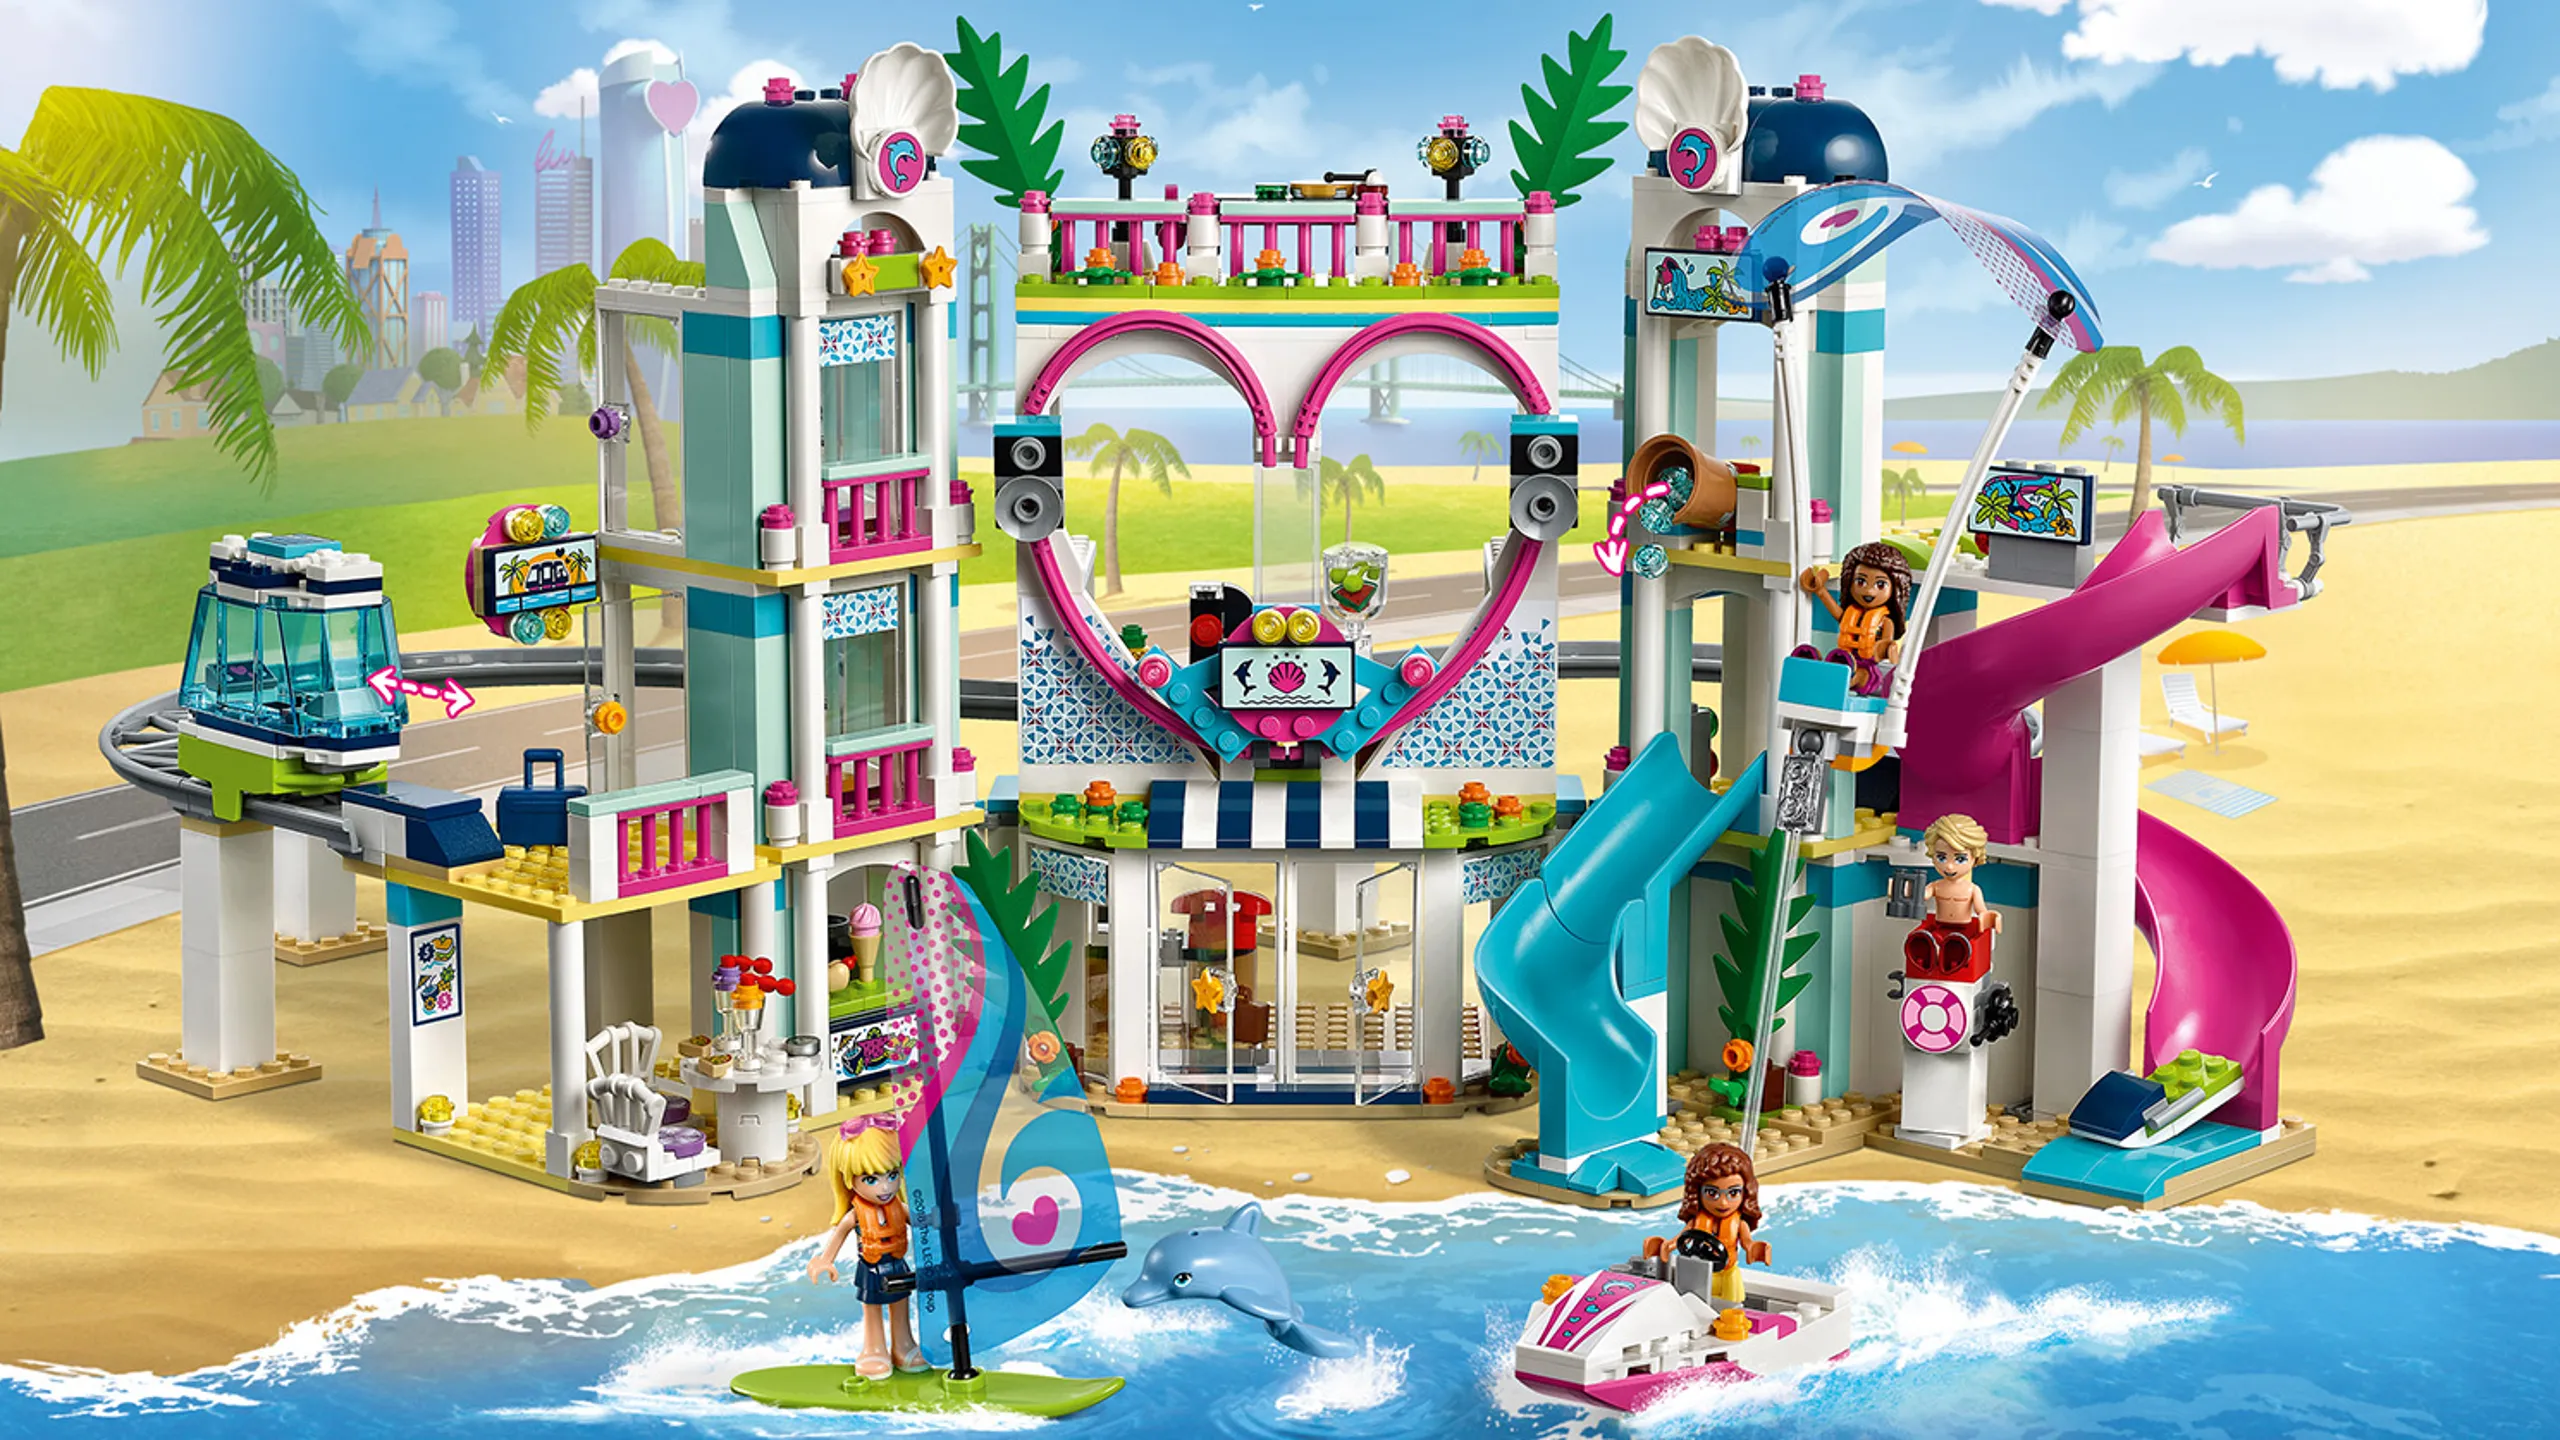 LEGO Friends - 41347 Heartlake City Resort - Whizz down the slide into the ocean at Heartlake City Resort water park! You can take the train from the city to the beach and hang out, surf or use a water scooter.